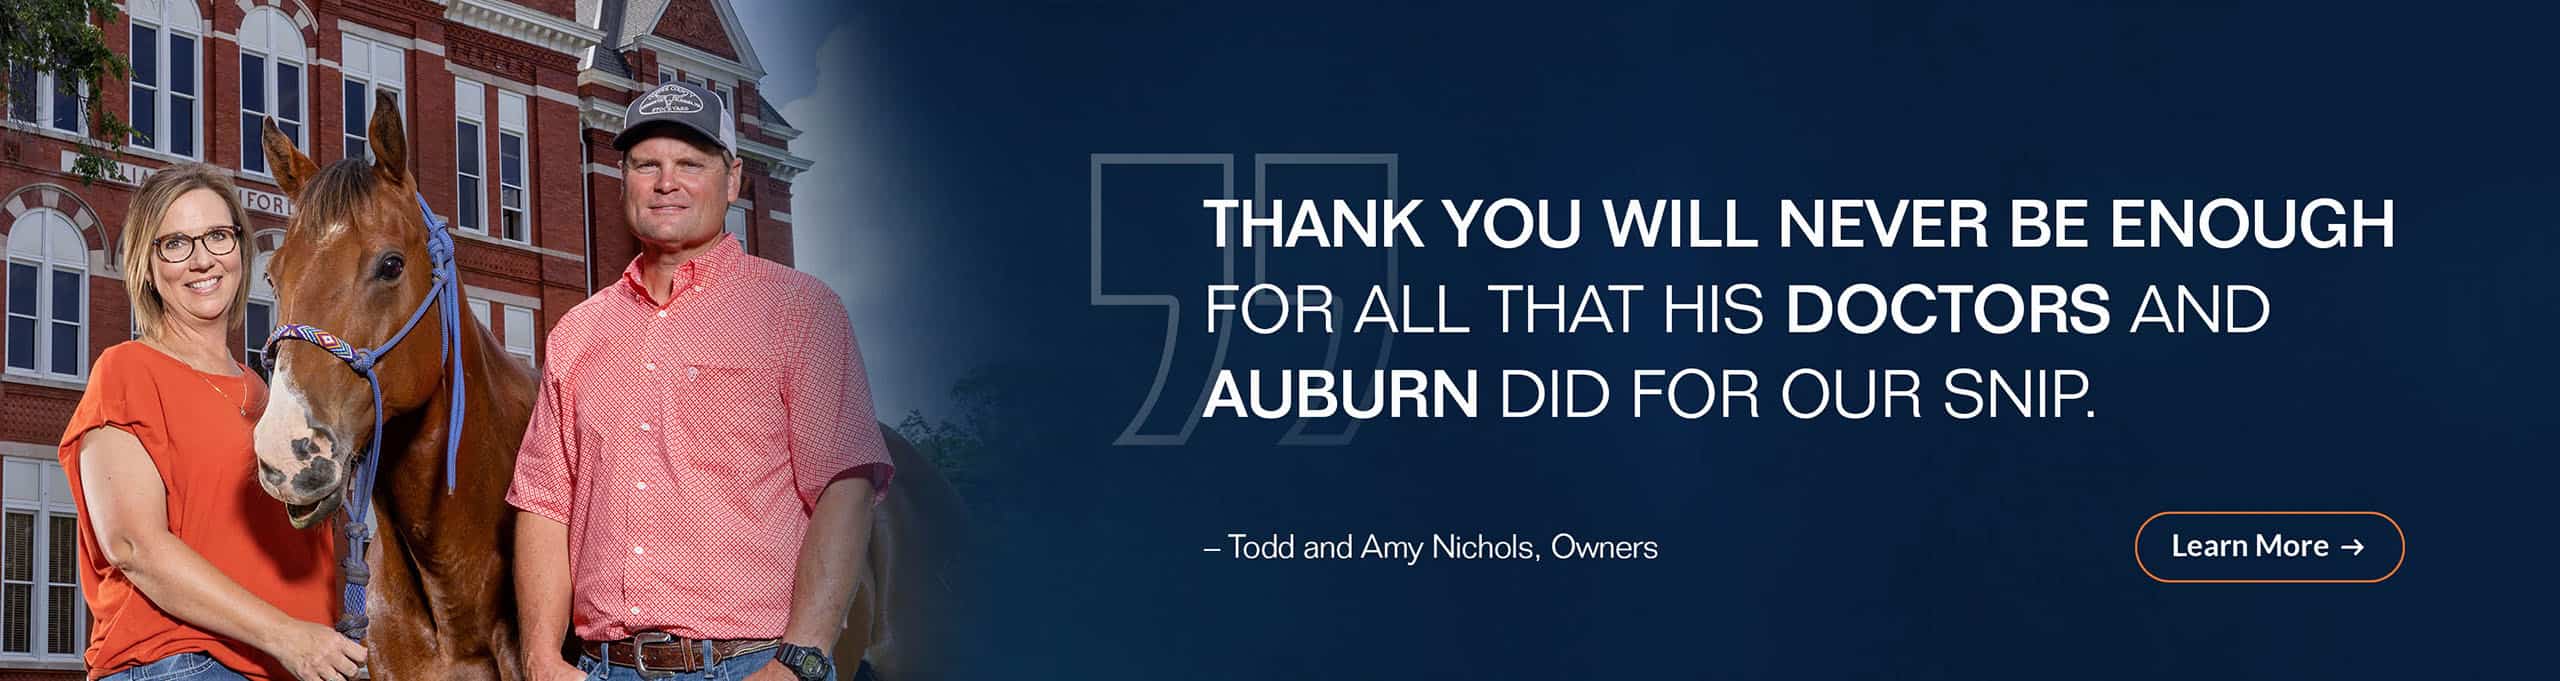 Thank you will never be enough for all that his doctors and Auburn did for our Snip.